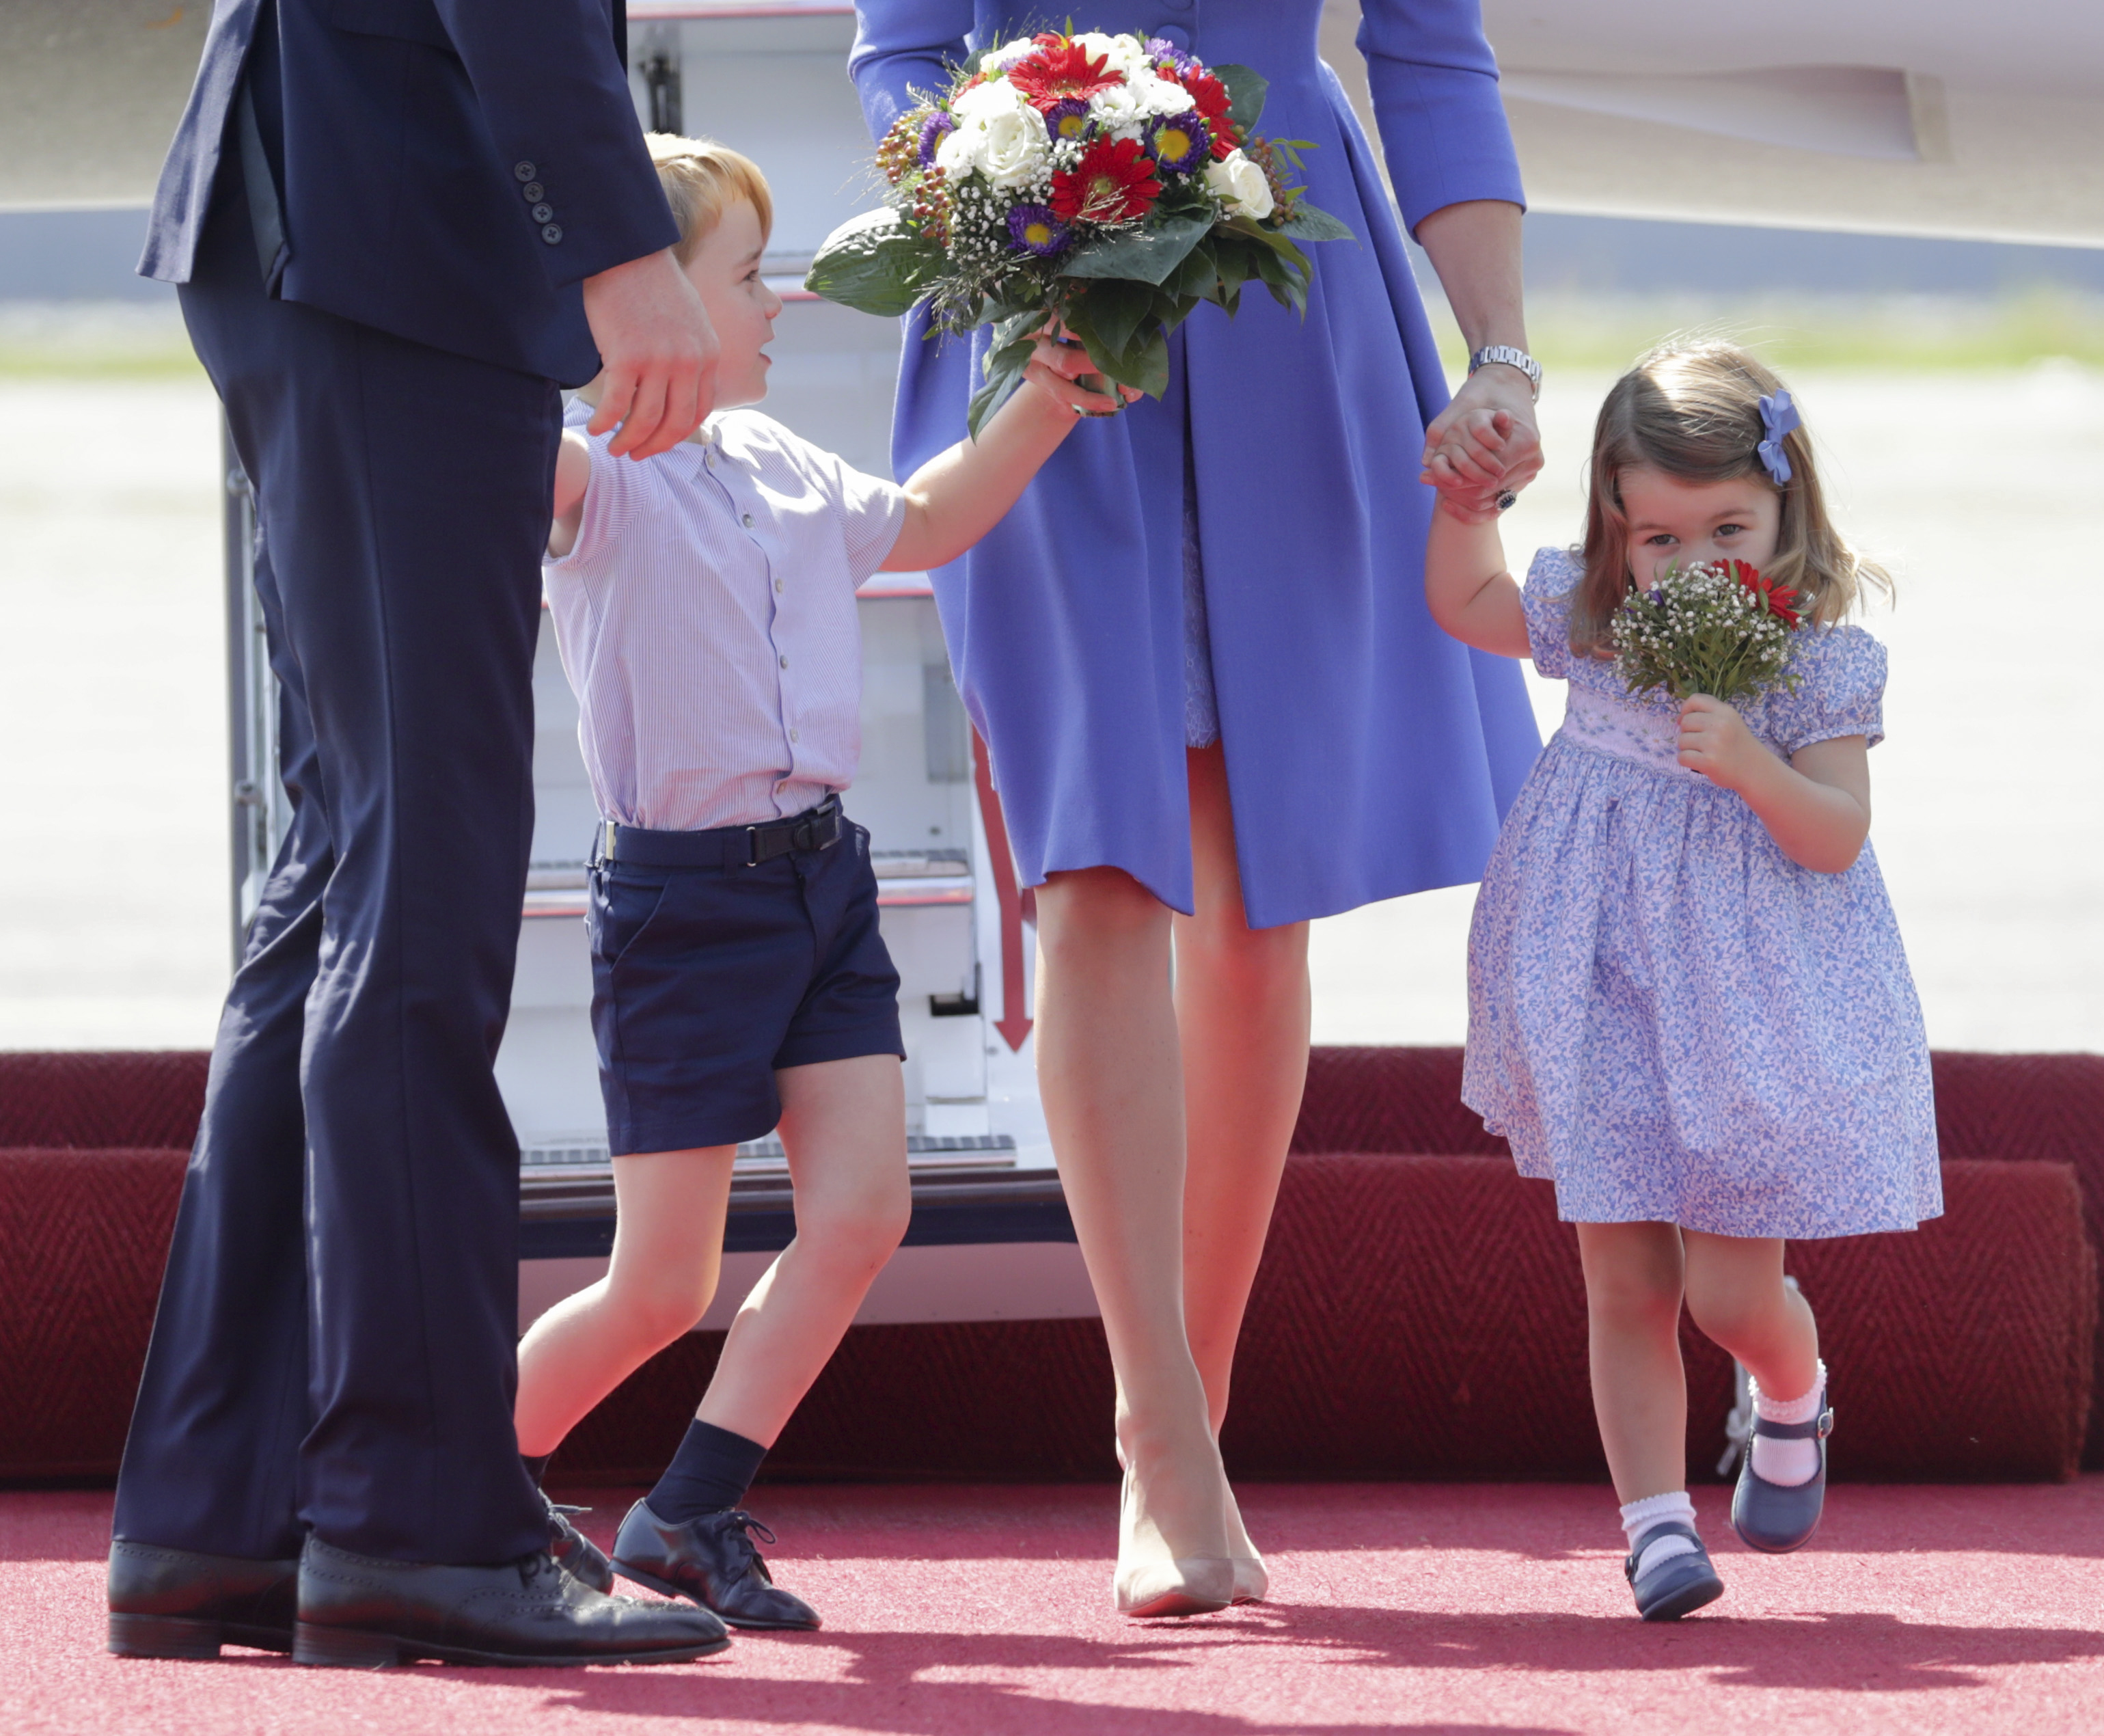 Charlotte, the daughter of Britain's Prince William and his wife Catherine, Duchess of Cambridge, smells a bunch of flowers beside her brother Prince George'after arriving at Tegel Airport in Berlin, Germany, 19 July 2017. Photo by: Kay Nietfeld/picture-alliance/dpa/AP Images